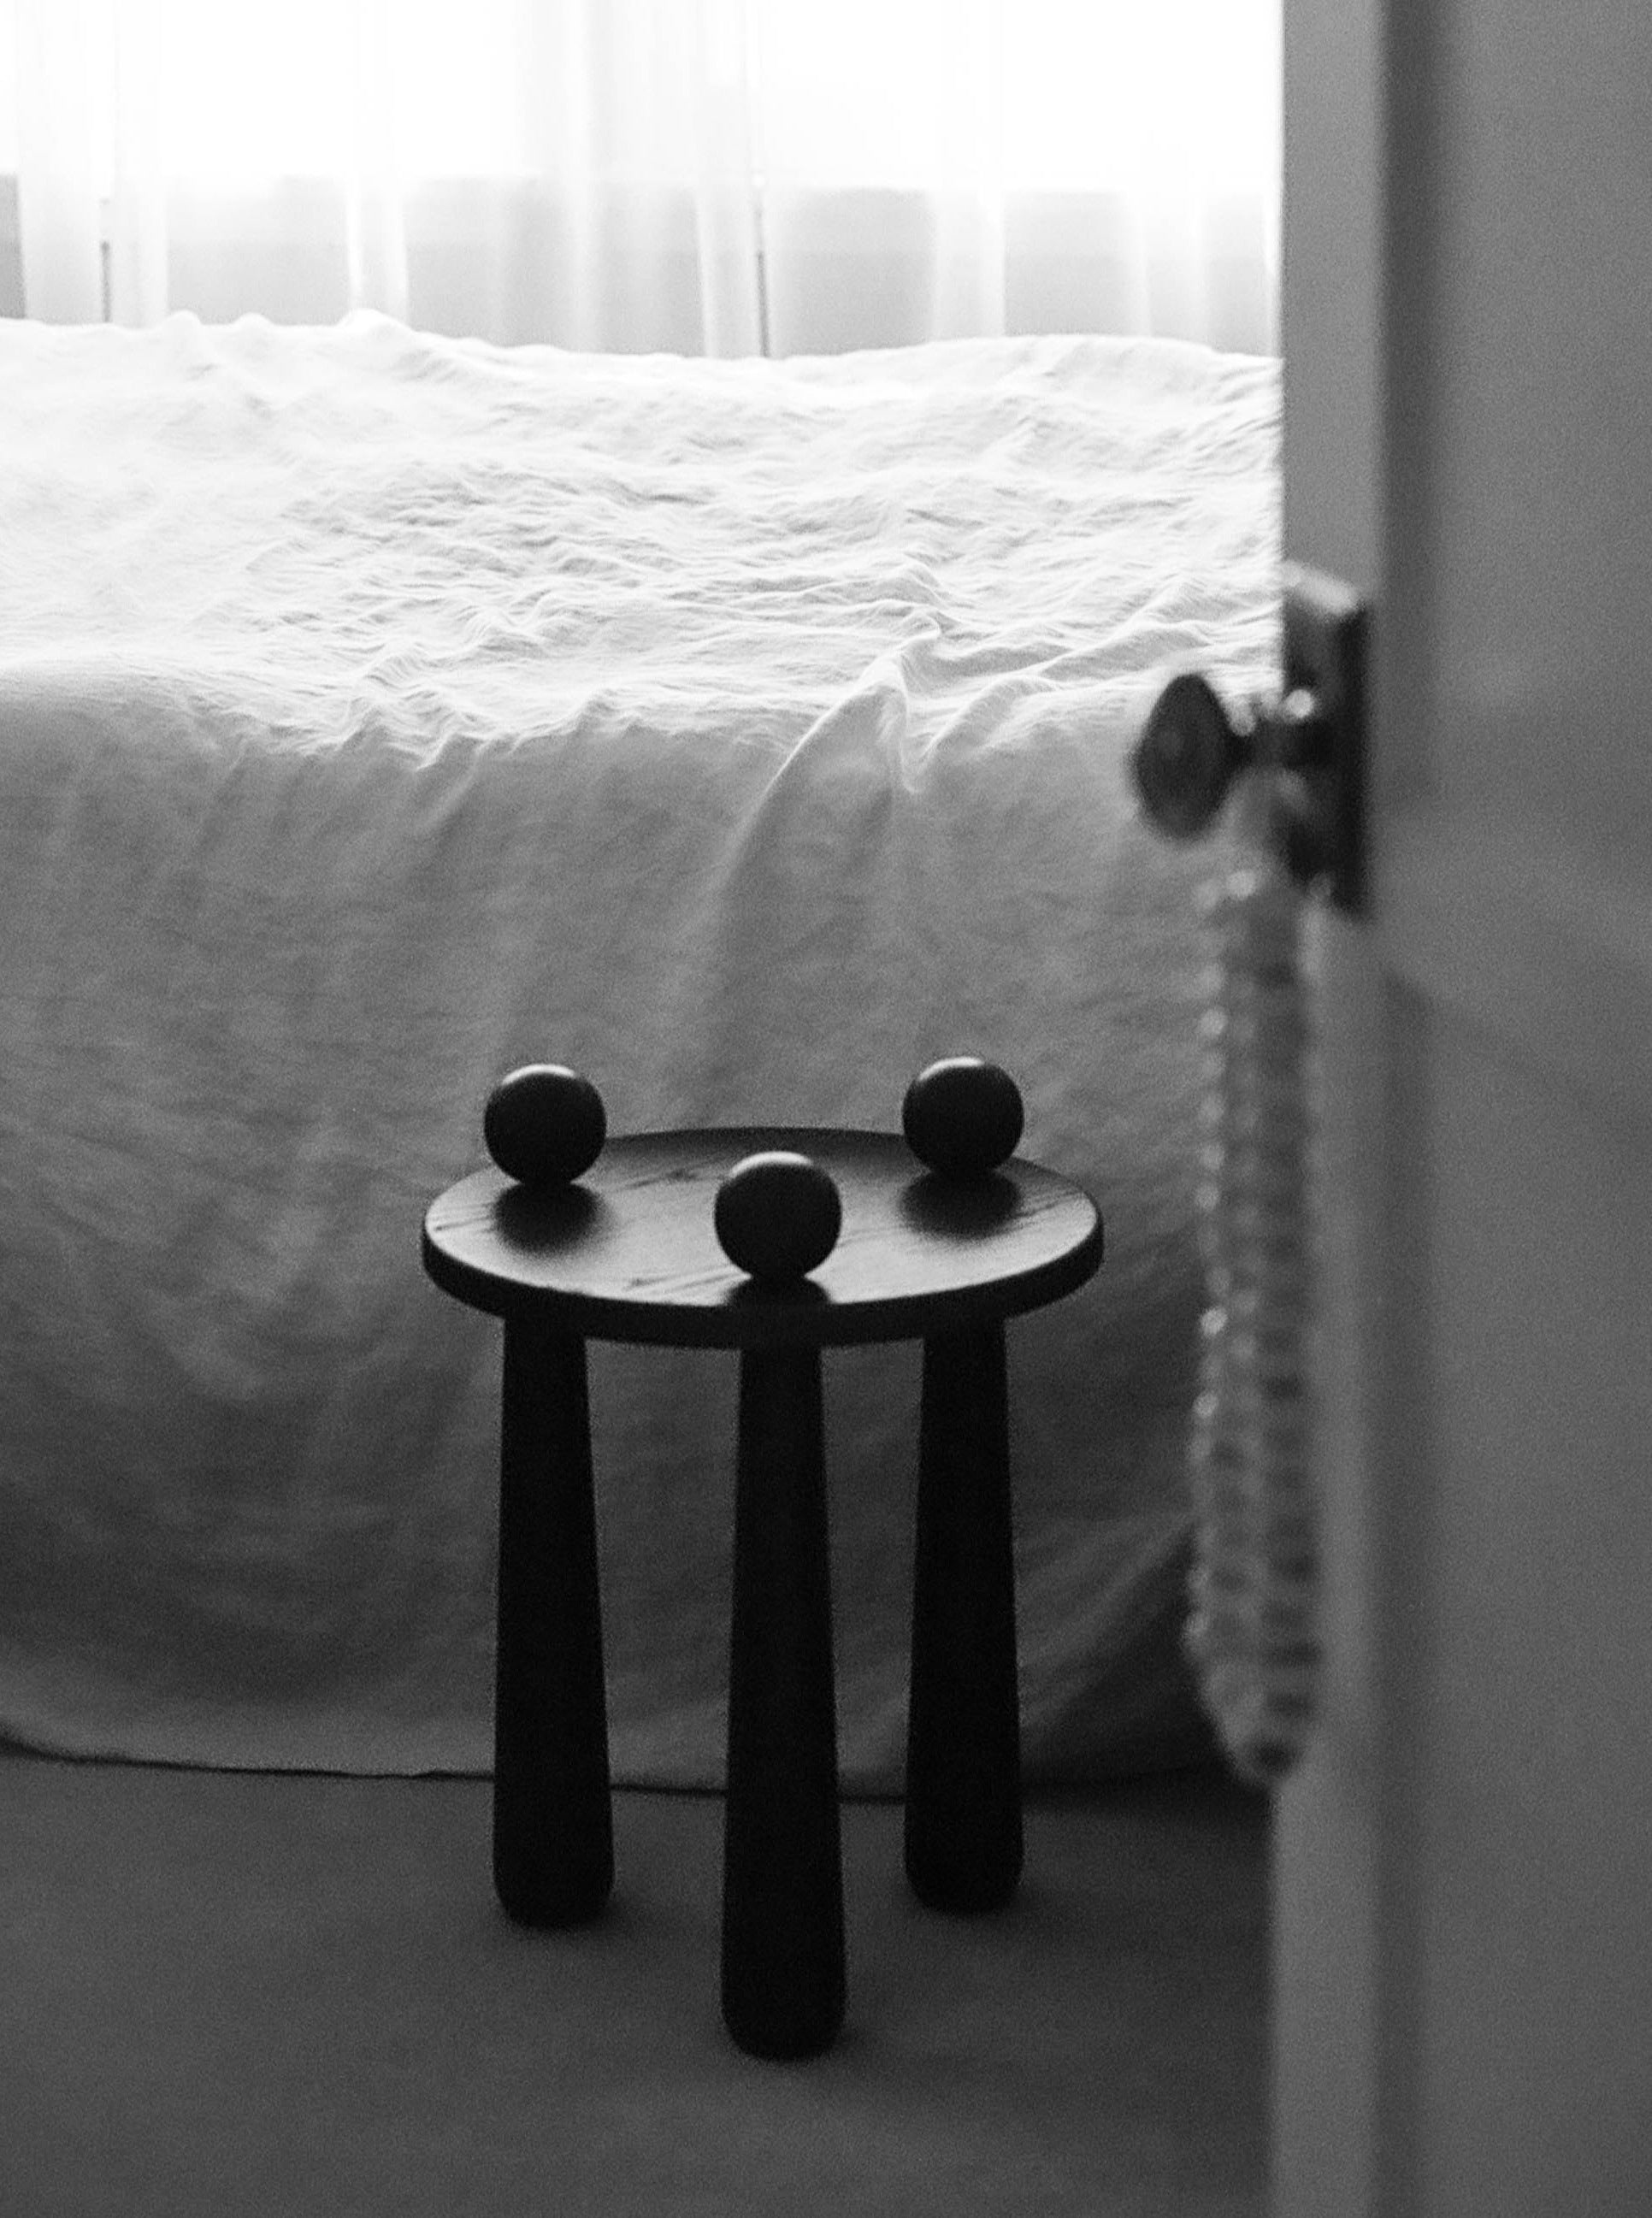 Black and white image of a minimalist interior. A small, round, three-legged Dott Stool, Ebony by TASE GALLERY sits next to a bed covered with a plain, white sheet. Three small, round objects like ball and bass caps are placed on the table. Part of a door and a doorknob with a beaded decoration are visible.